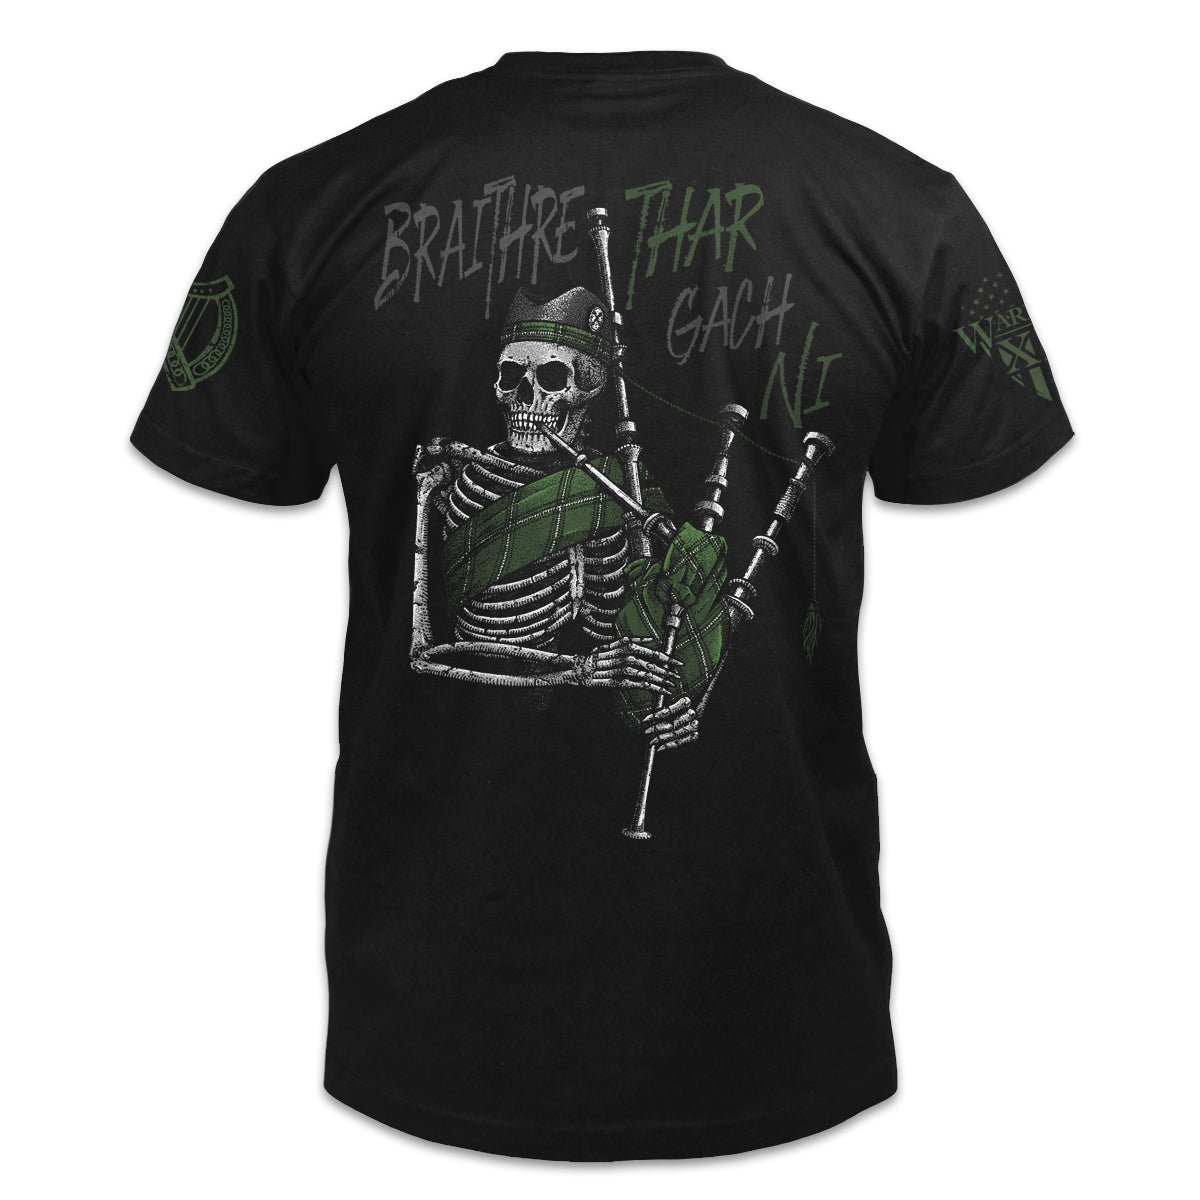 A black t-shirt with the words "Braithre Thar Gach Ni", meaning "Brotherhood Before All" in Gaelic and a skeleton playing the bagpipes printed on the back of the shirt. 